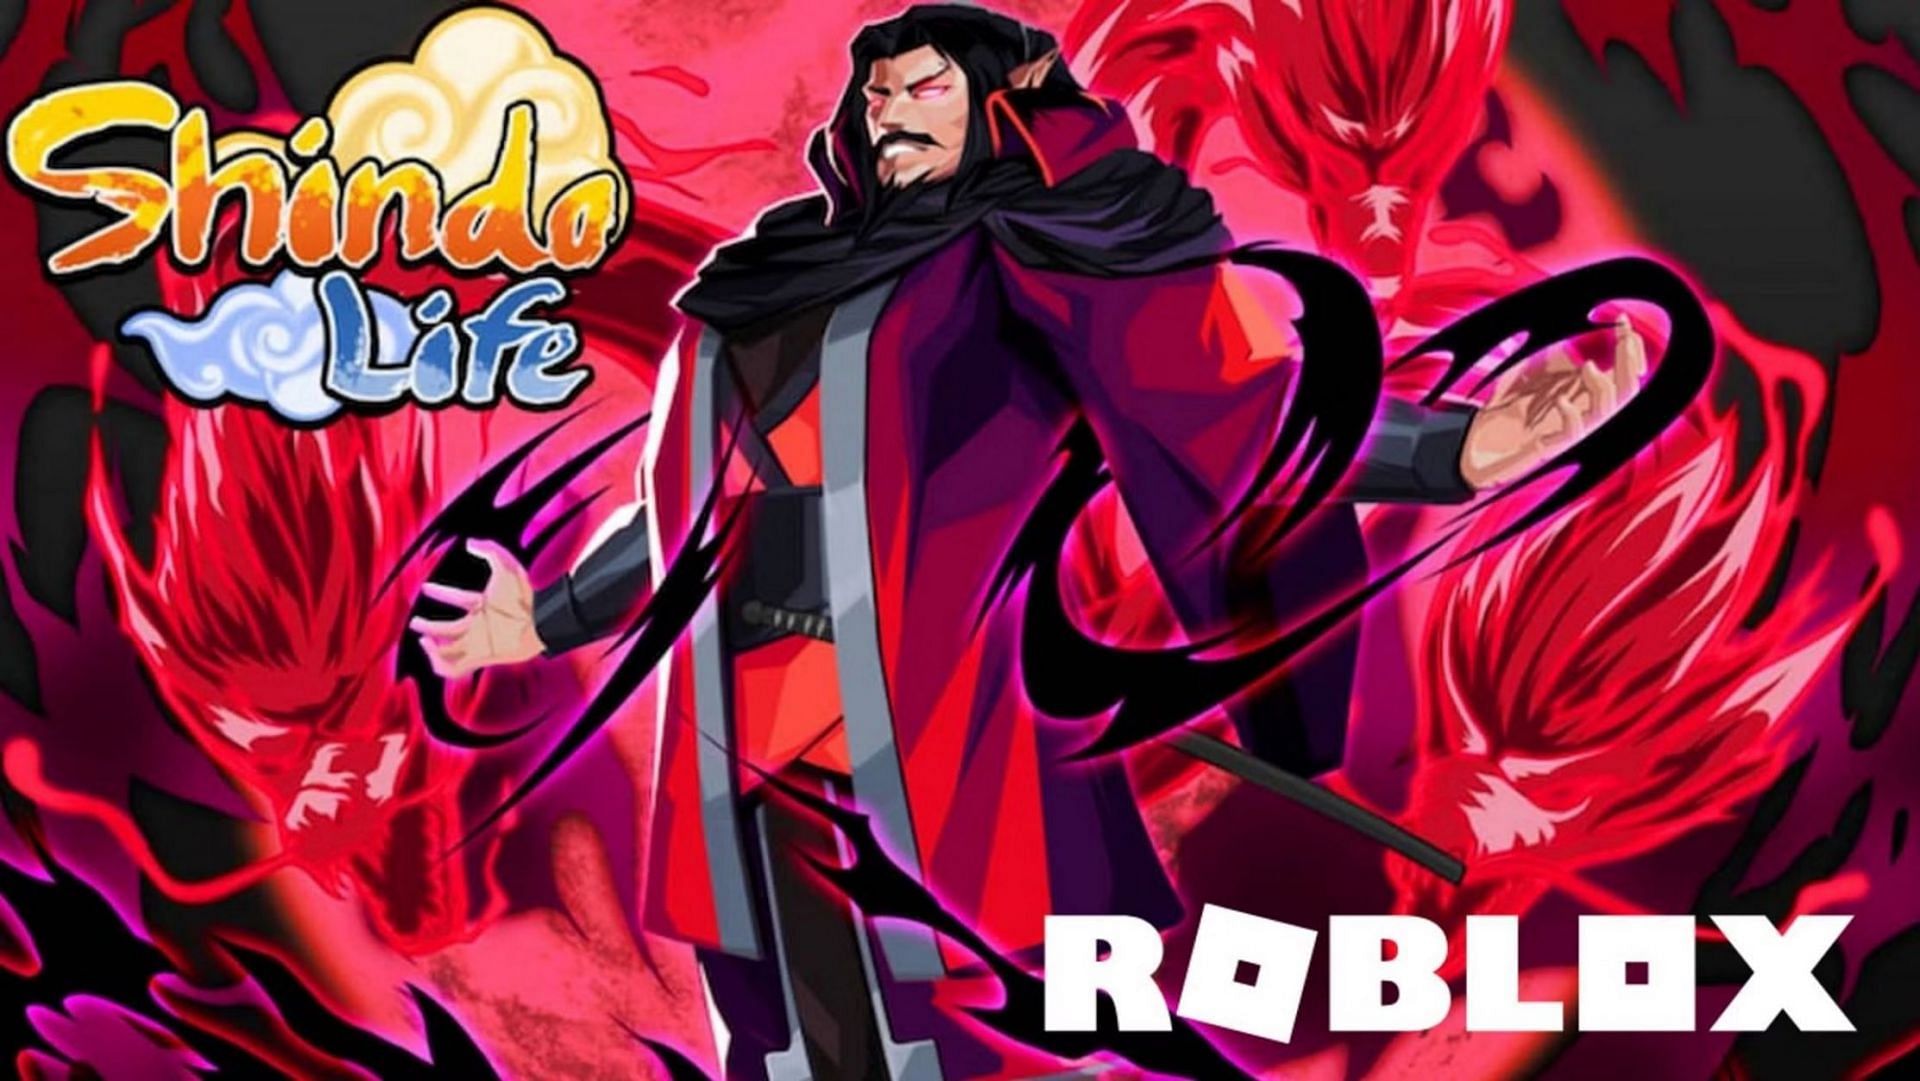 5 best bloodlines in Roblox Shindo Life